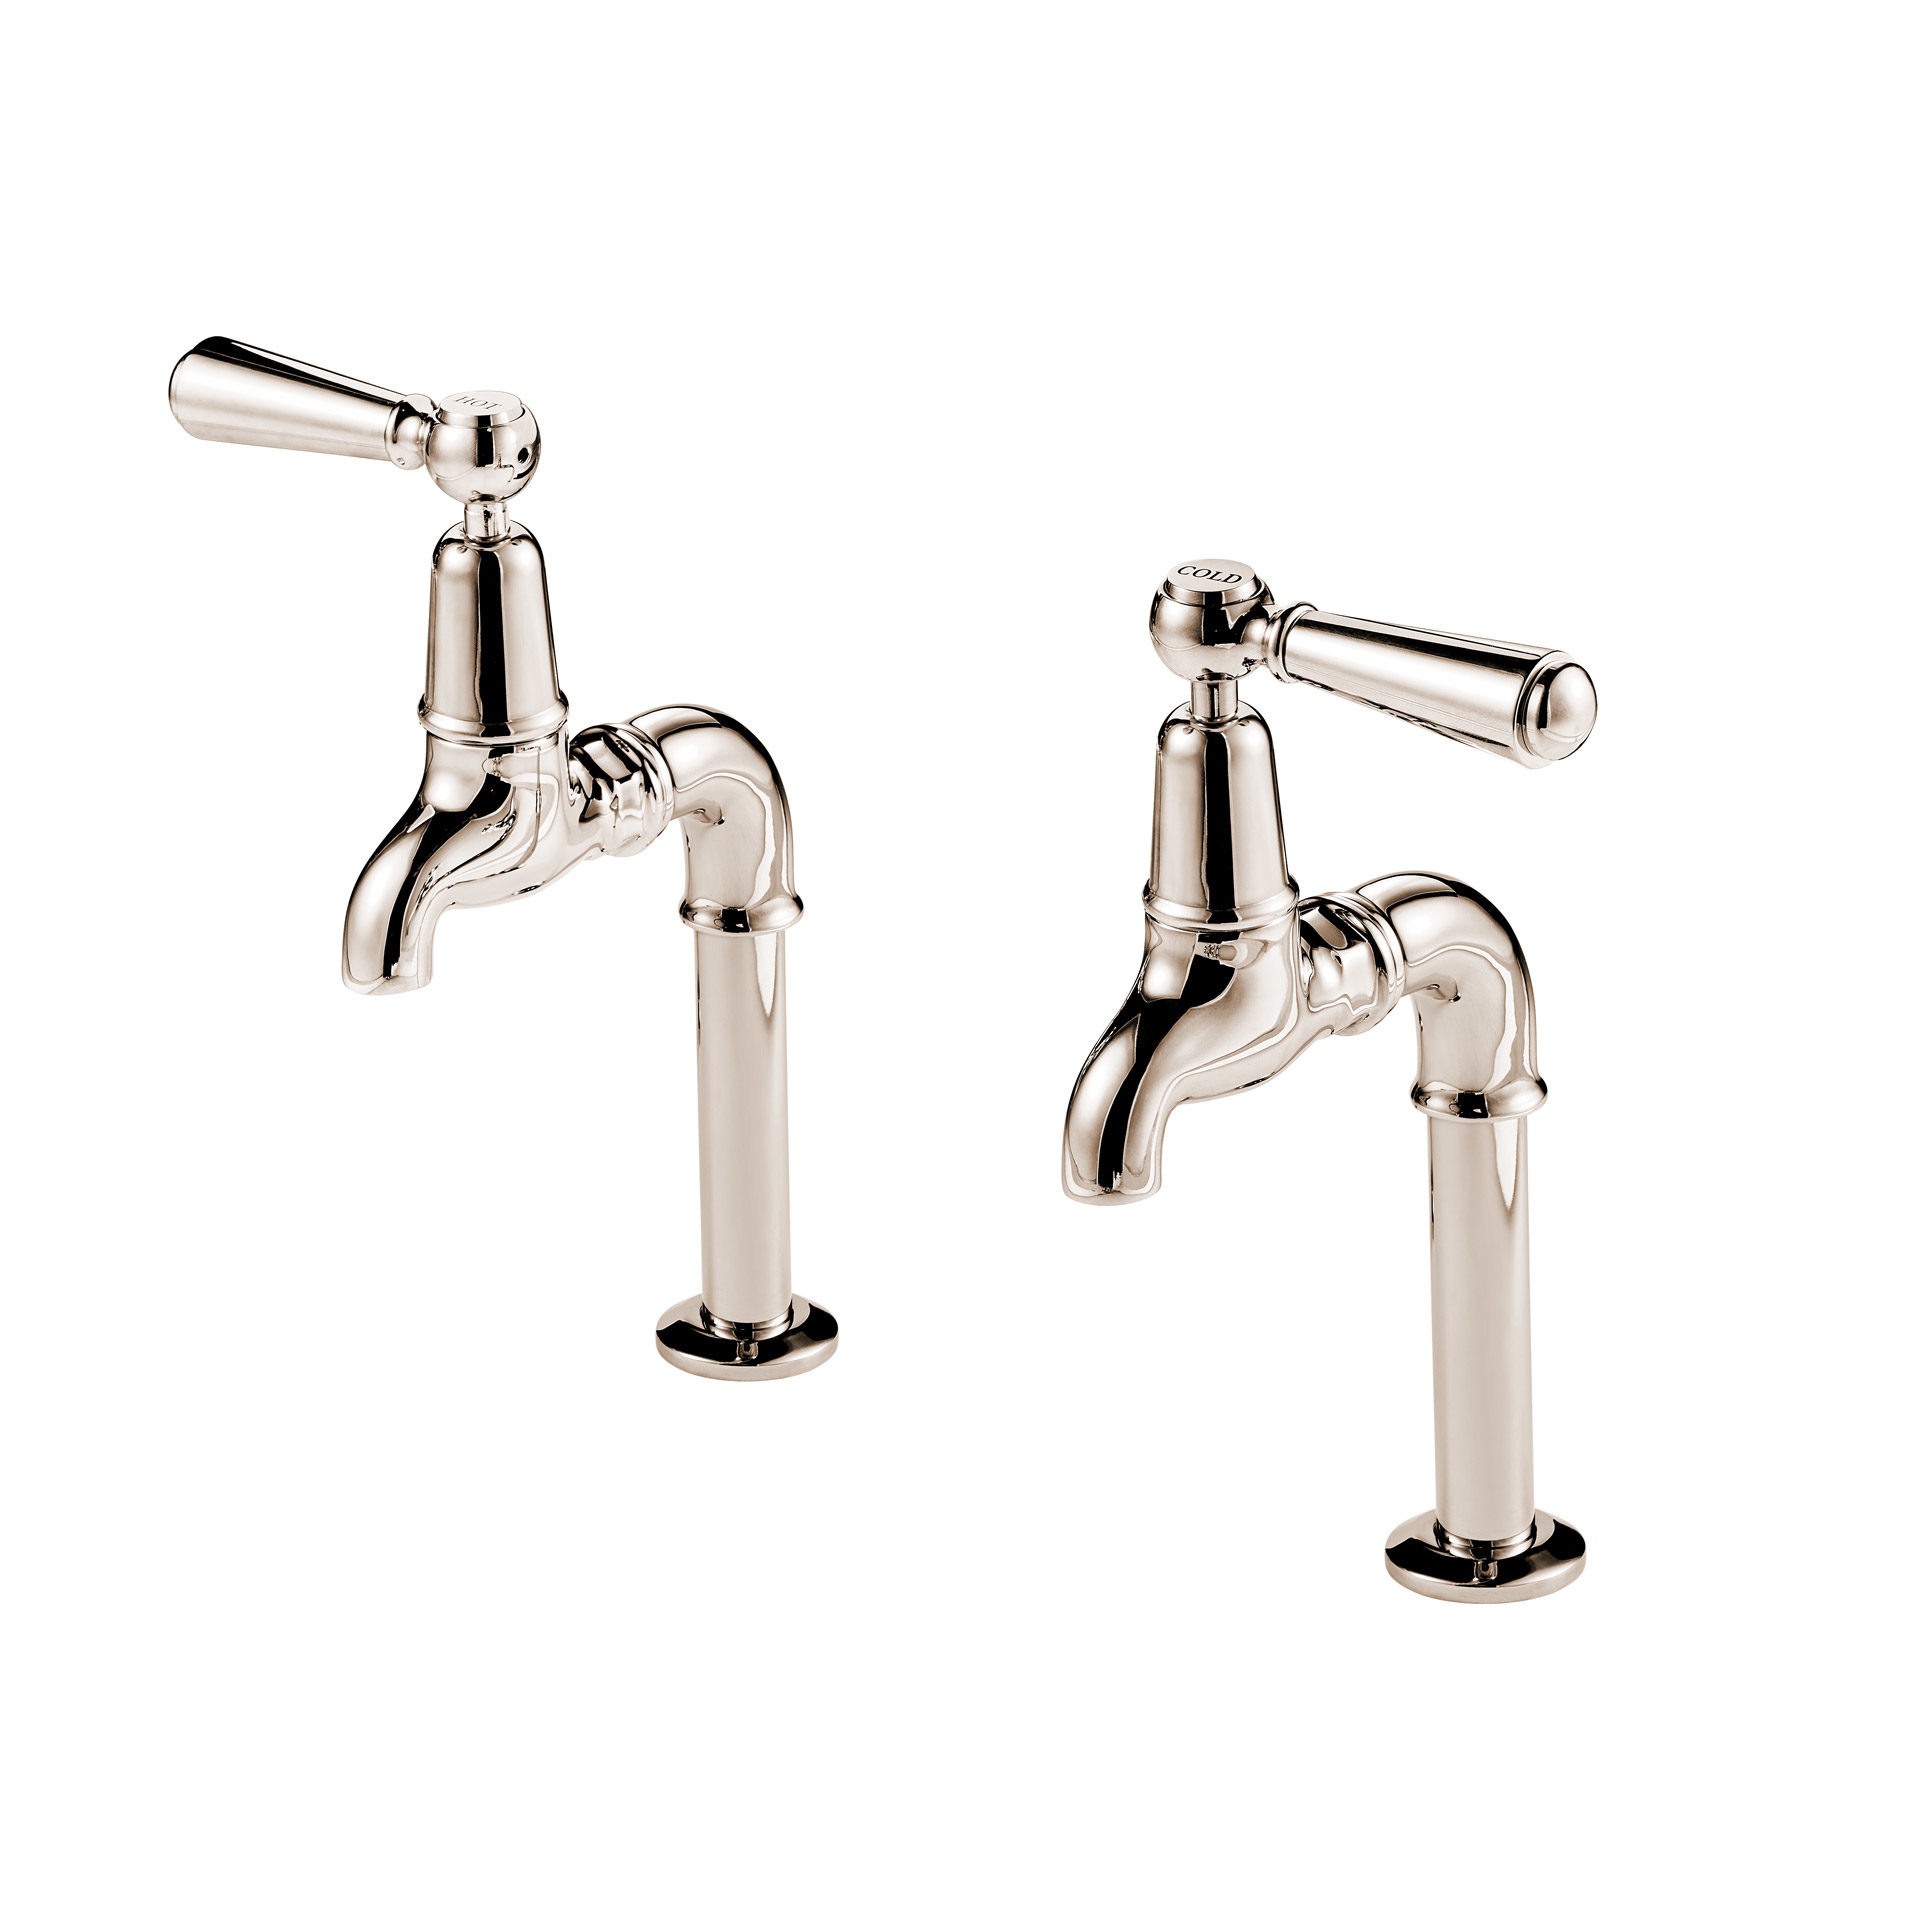 Barber Wilsons 6 Inch Deck Mounted Bib Taps with Metal Lever in Polished Nickel